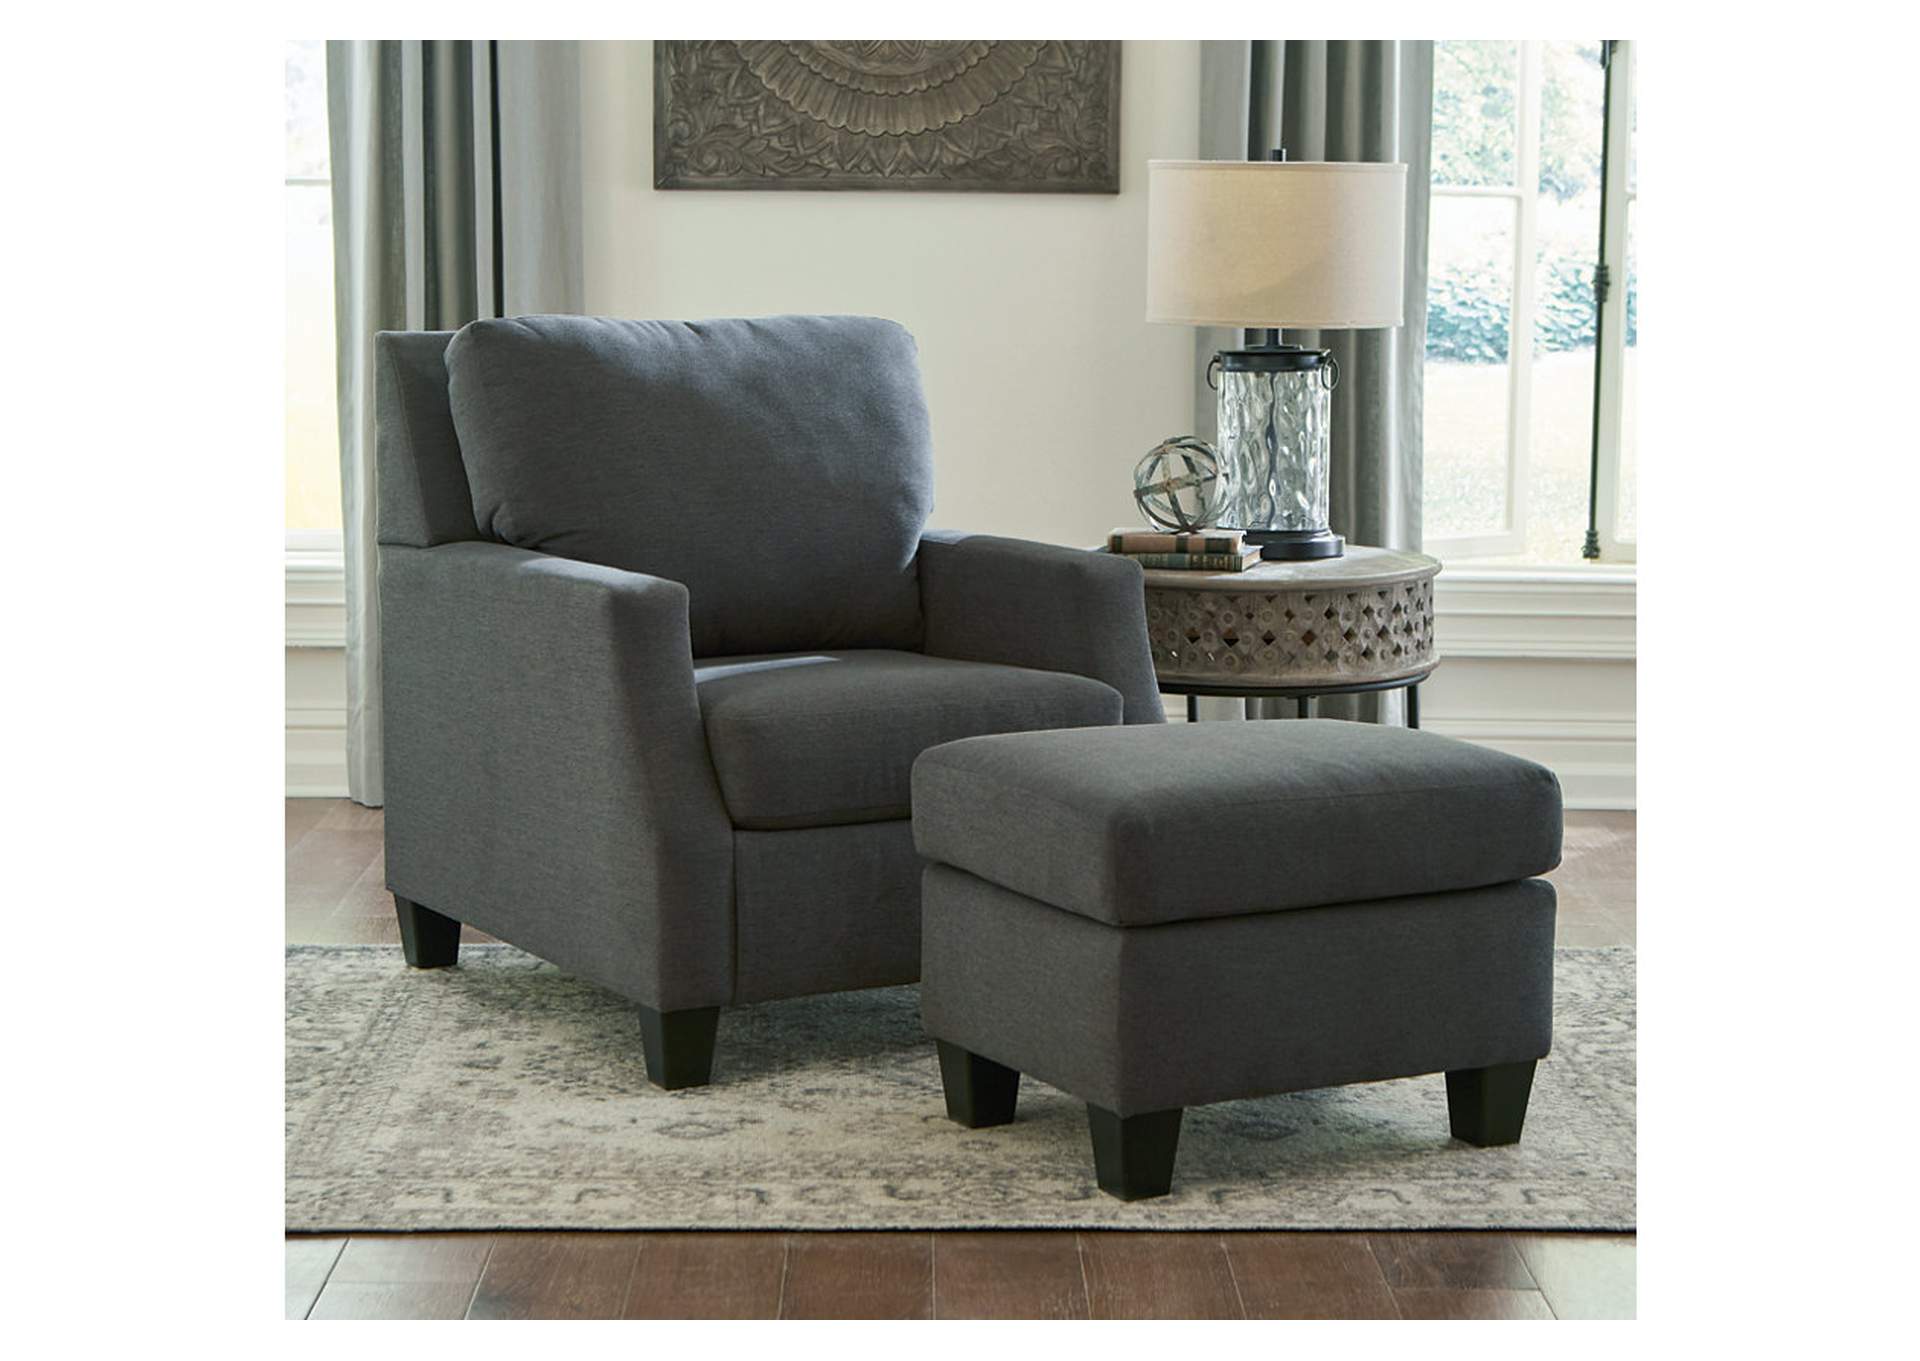 Bayonne Chair and Ottoman,Signature Design By Ashley